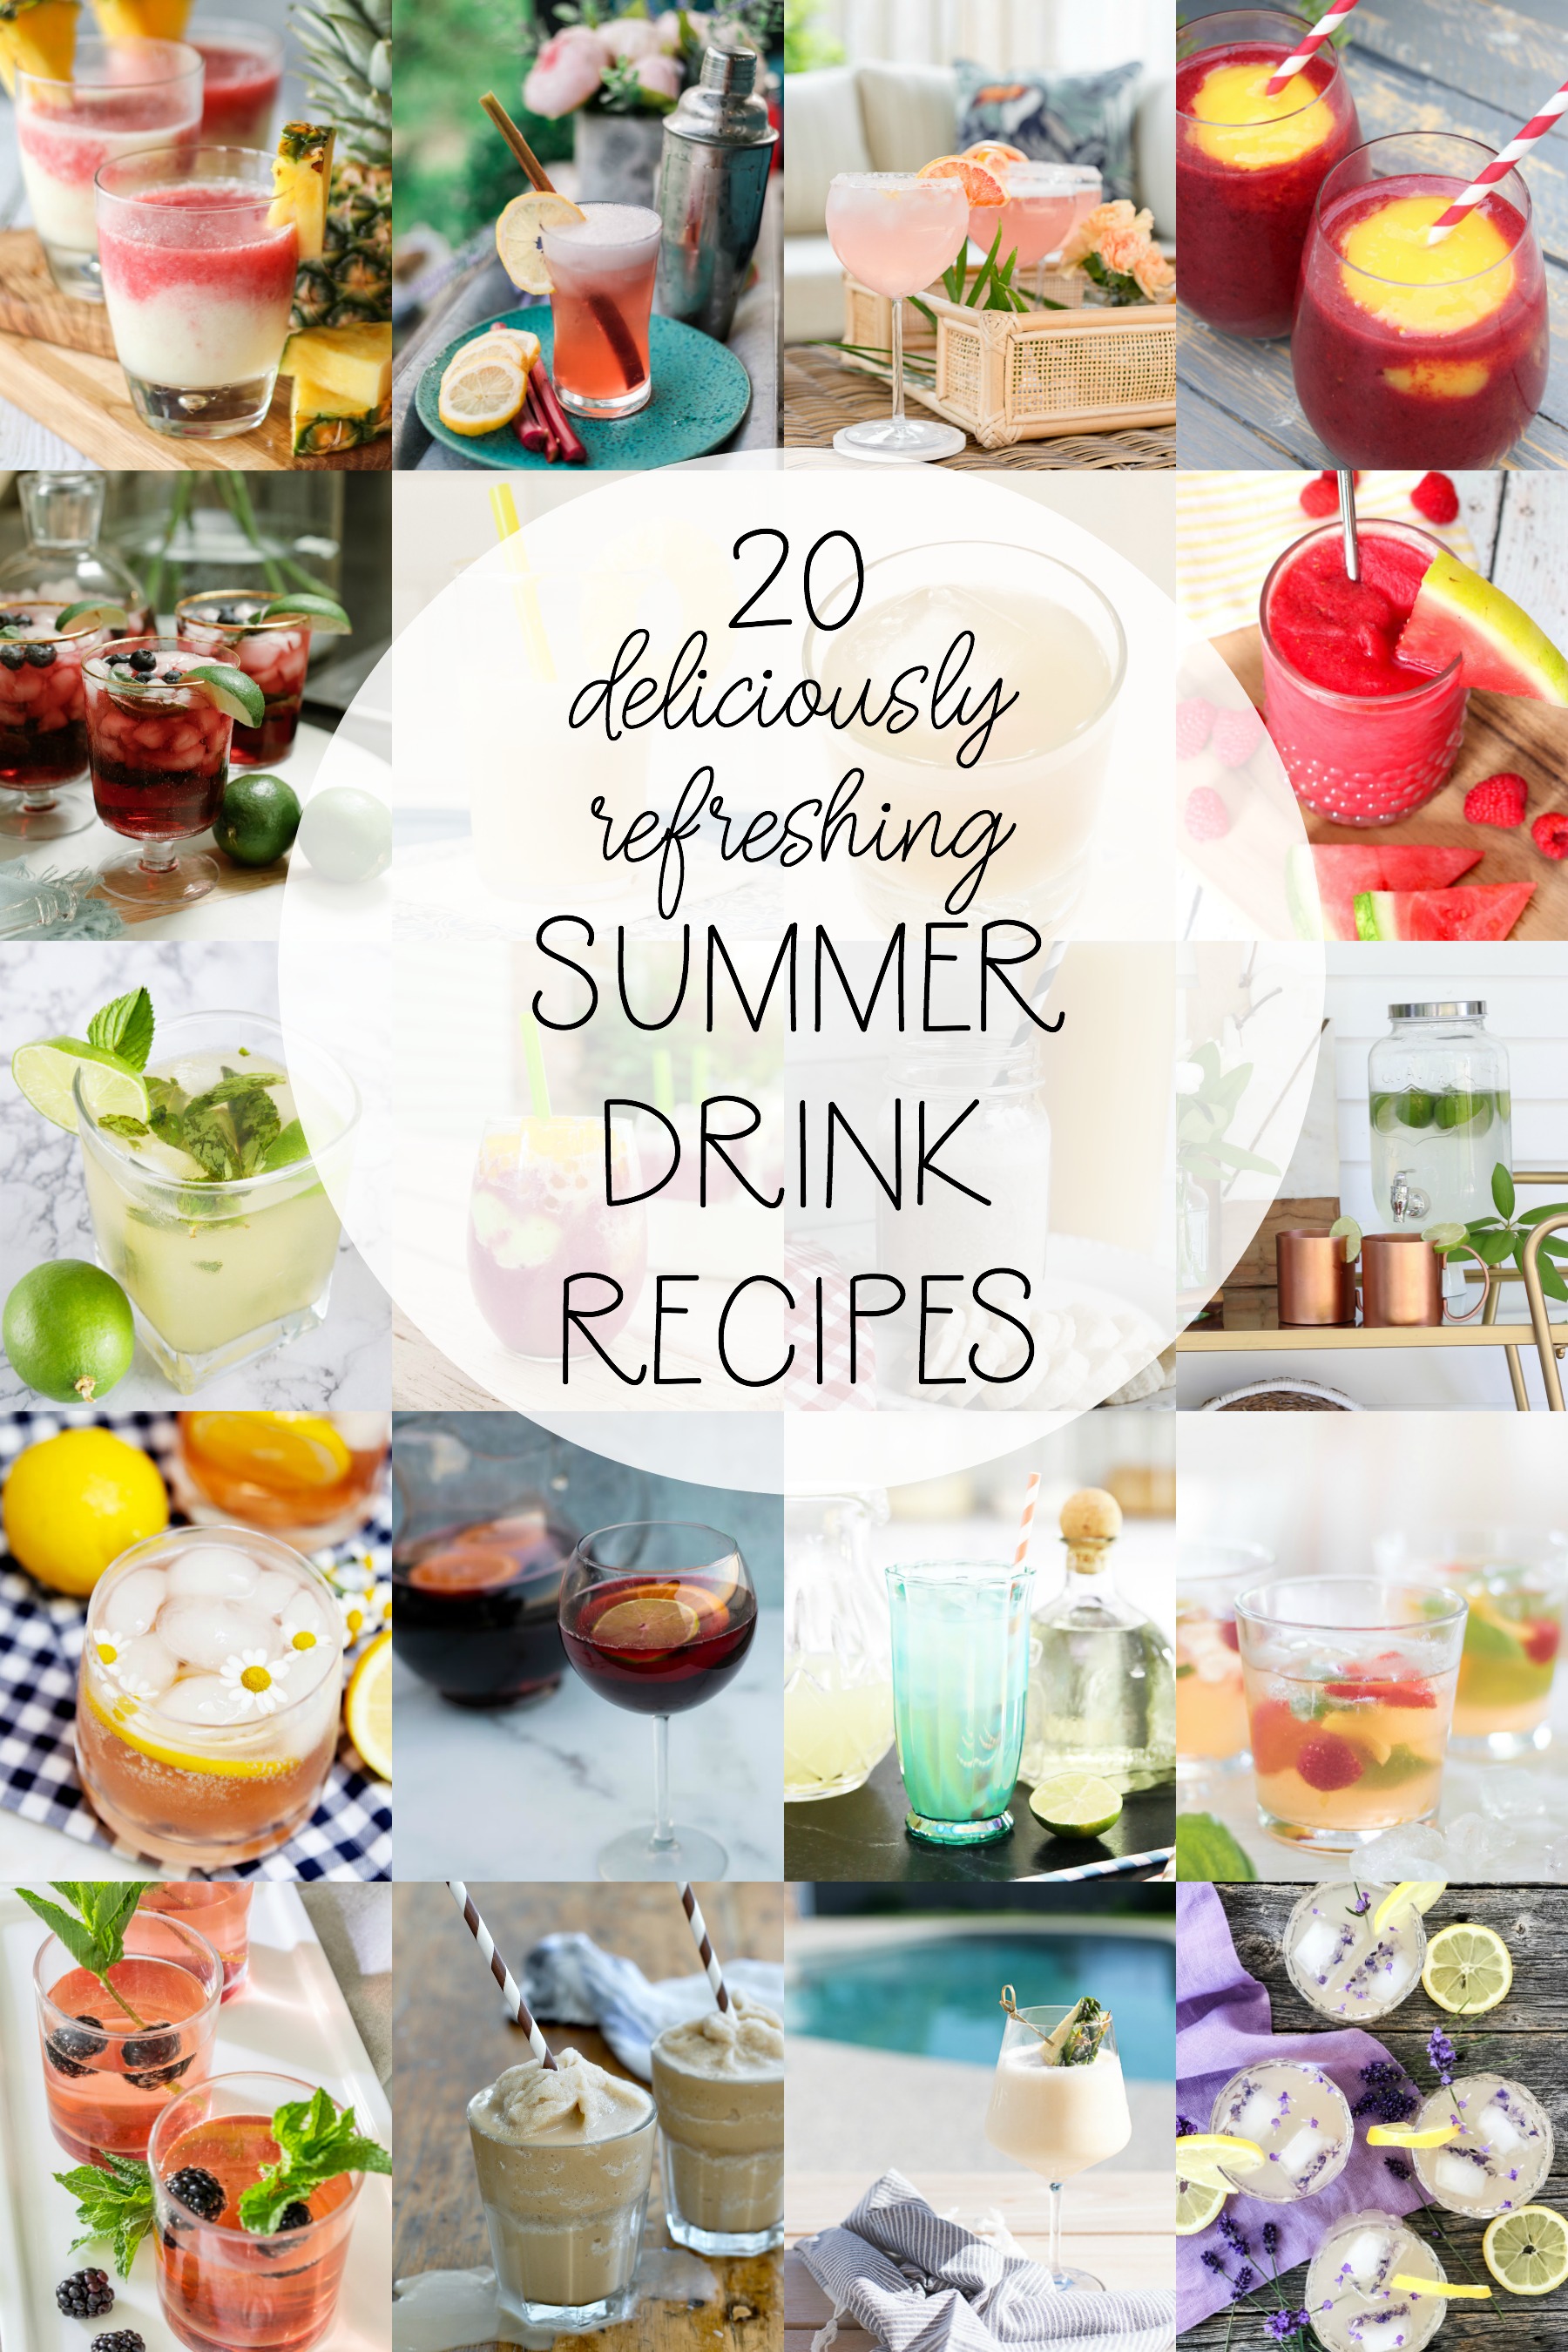 20 deliciously refreshing summer drink recipes poster.